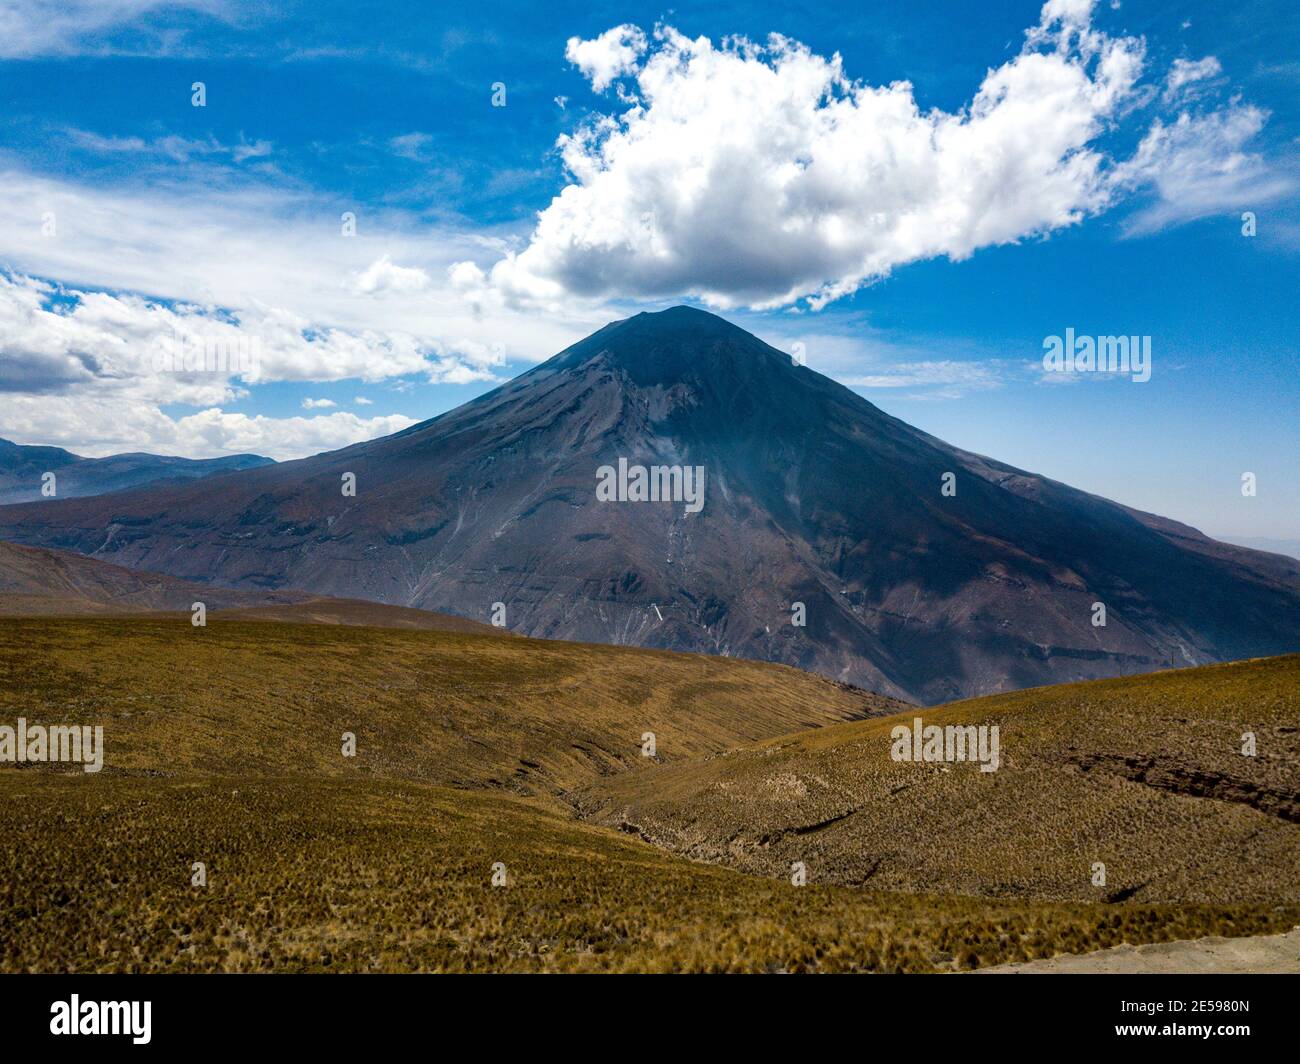 A view at the back of the Misti volcano y Arequipa, Peru in a sunny day. The dry and inhabited land can be seen in the sceene. Stock Photo